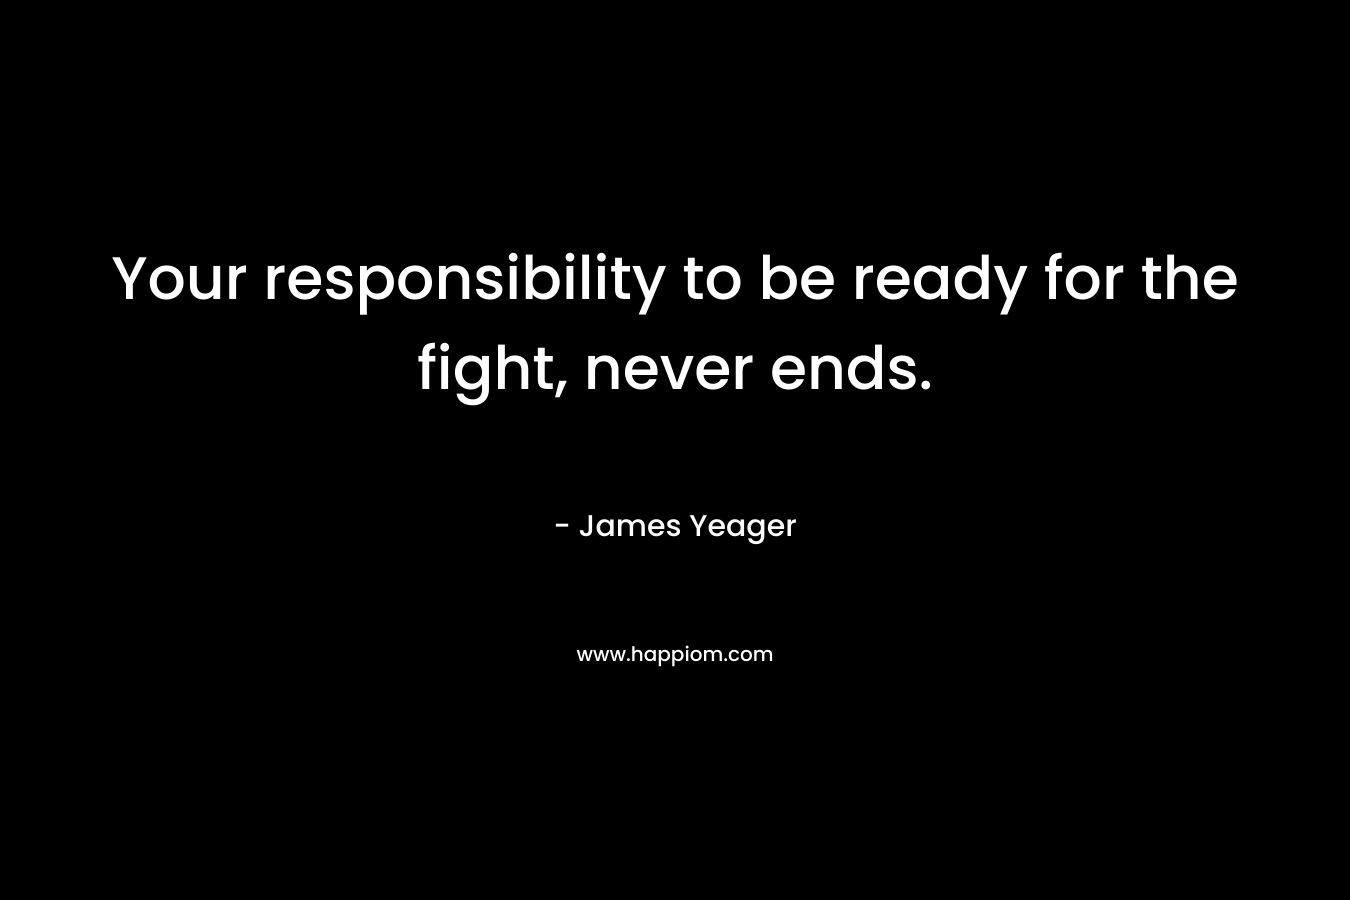 Your responsibility to be ready for the fight, never ends.